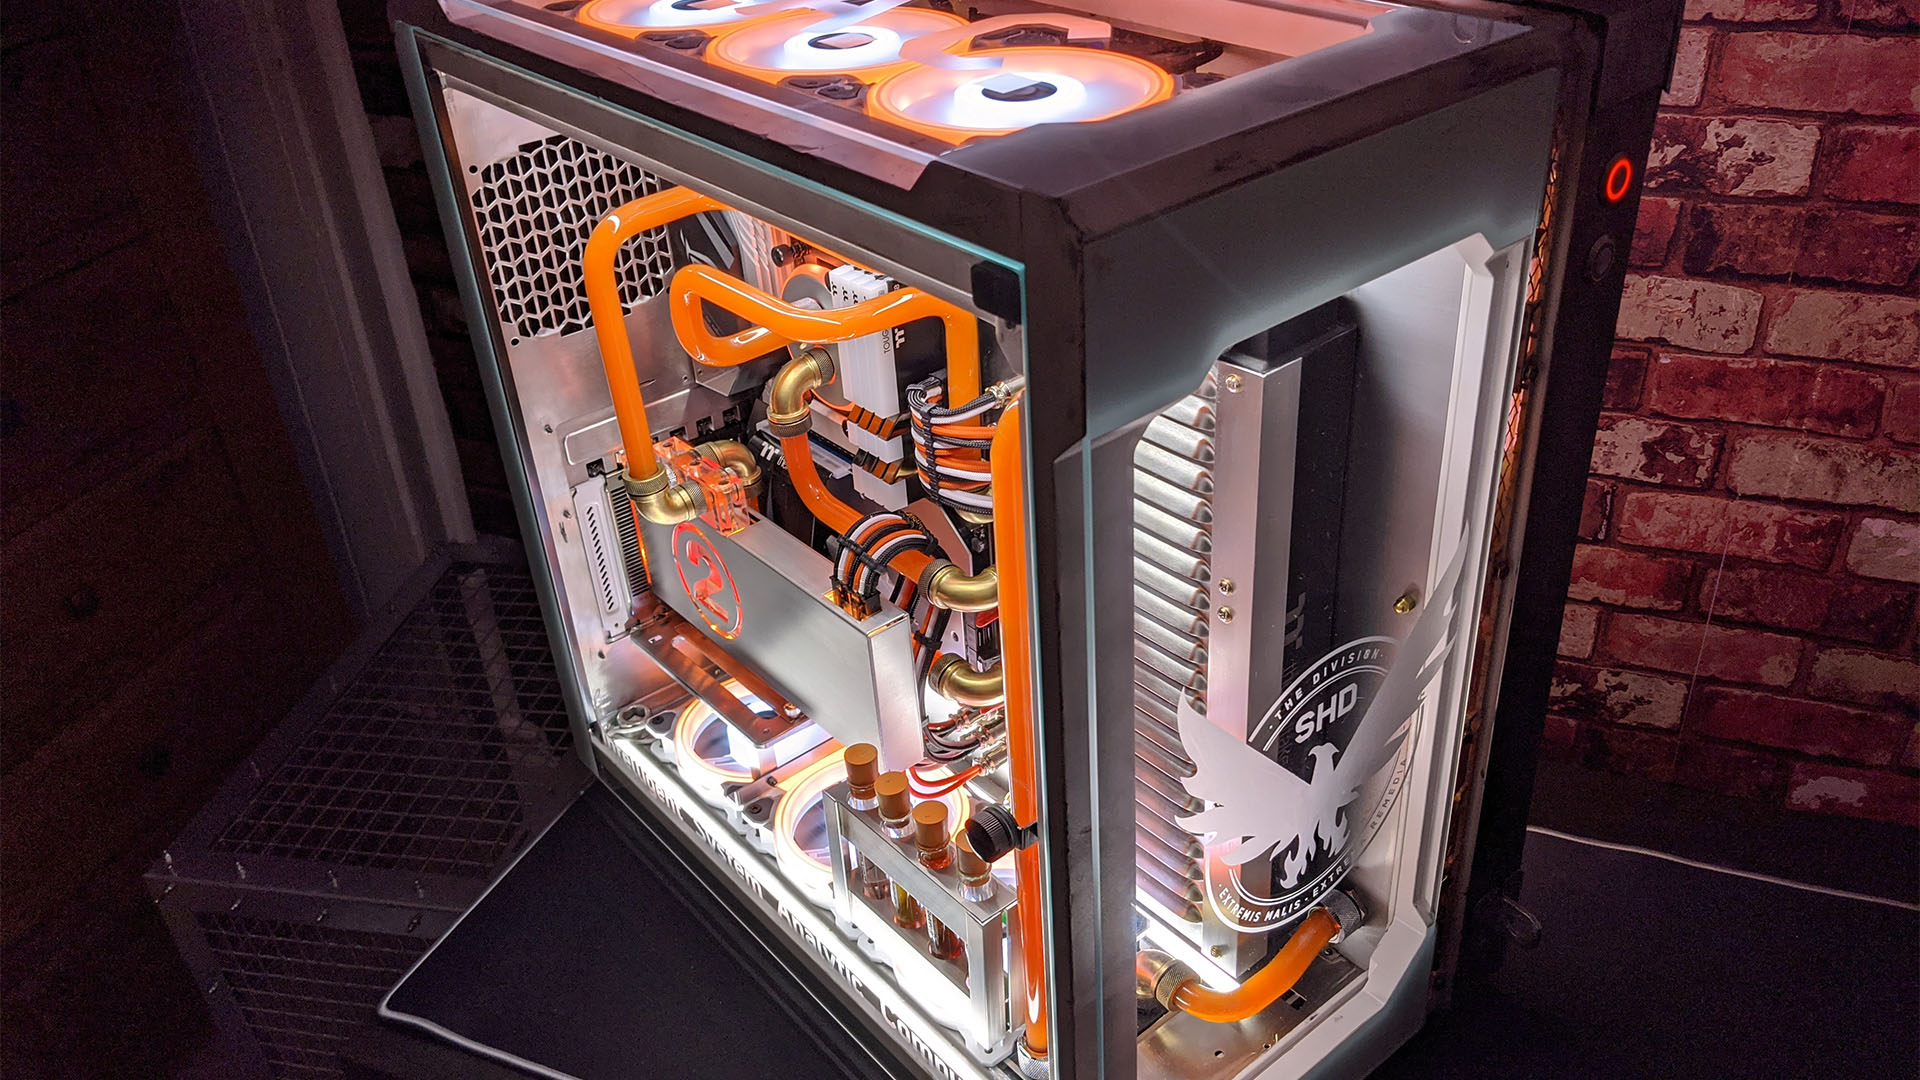 The Division 2 gaming PC in white and orange